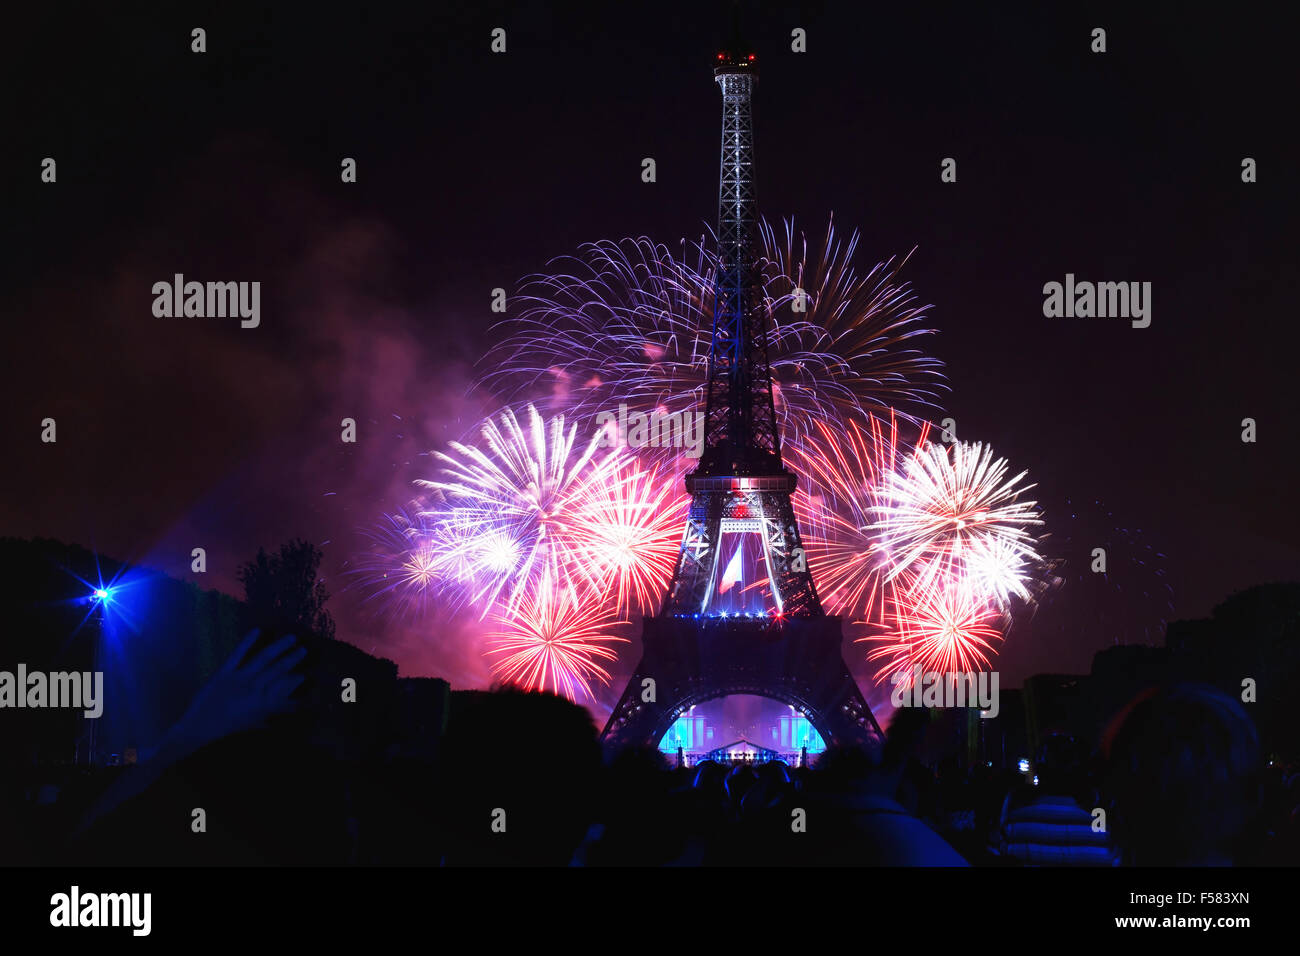 night scene of fireworks at Eiffel Tower in Bastille Day, National Day of France, July 14, 2013 in Paris France Stock Photo